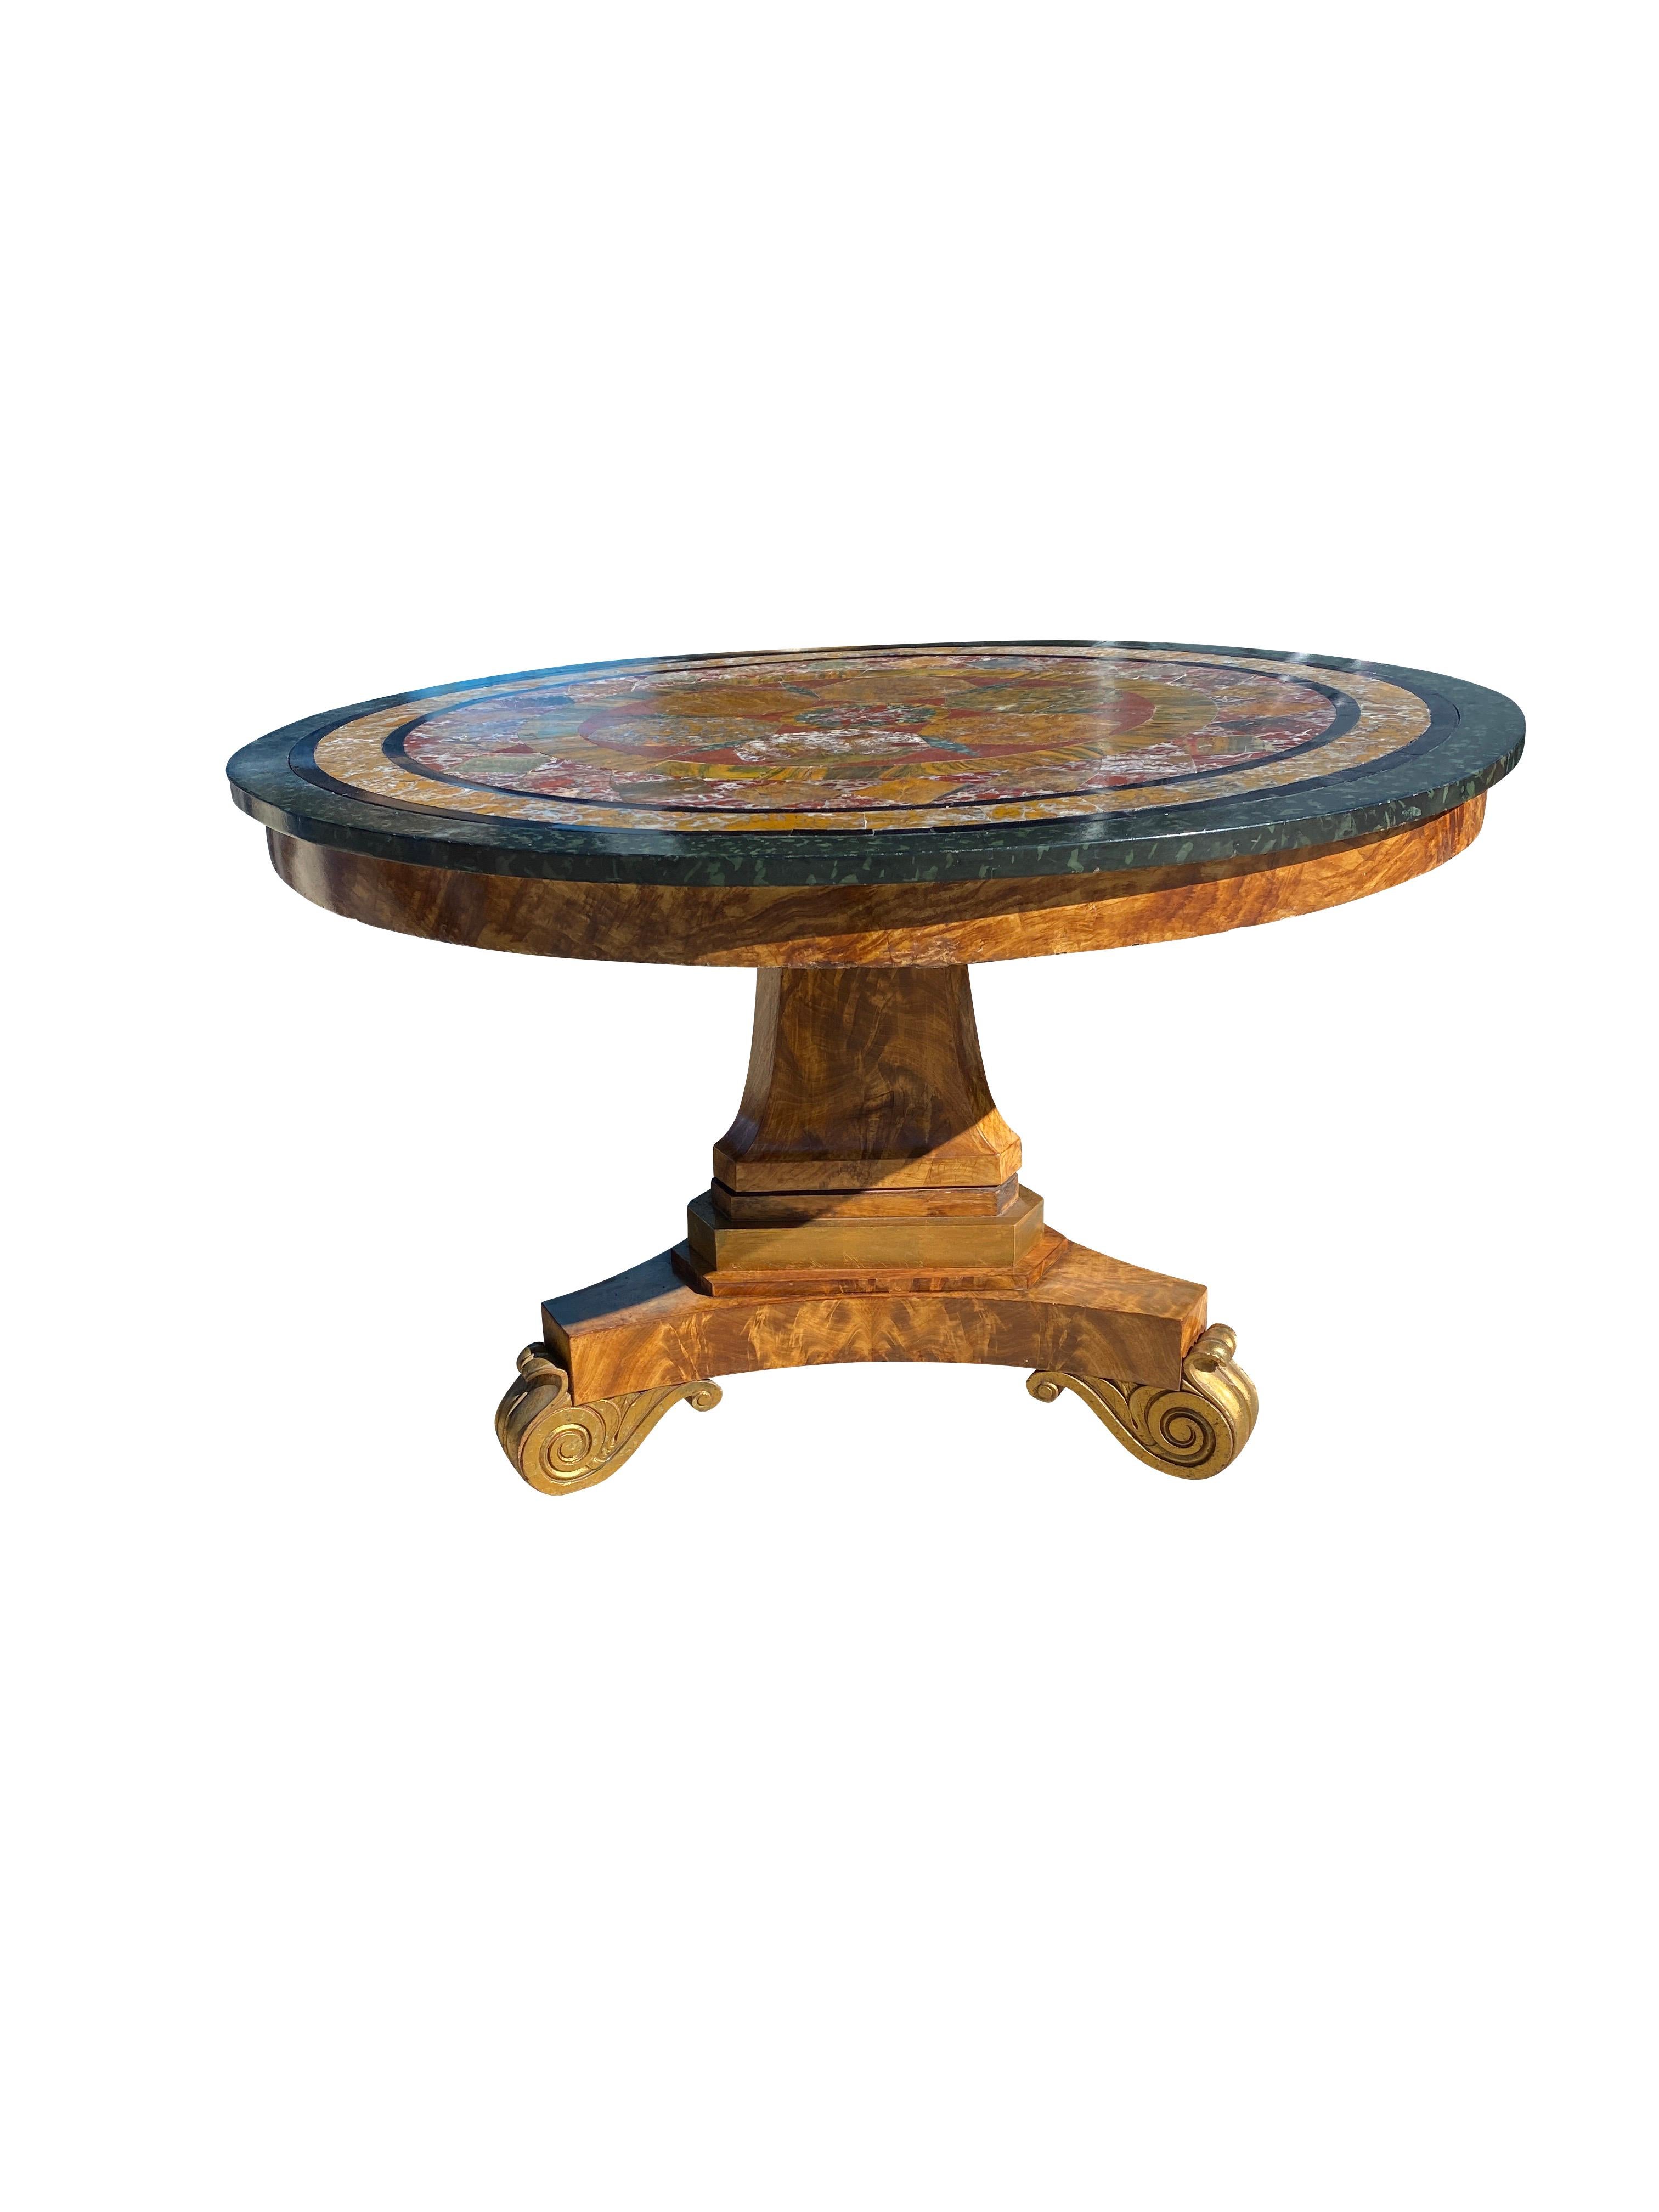 Circular top with wood edge surrounding a geometric mosaic of hard stones raised on a triangular tapered column and tripartite base with gilded scroll feet. From the estate of William Hodgins a noted Boston interior designer. The piece is featured